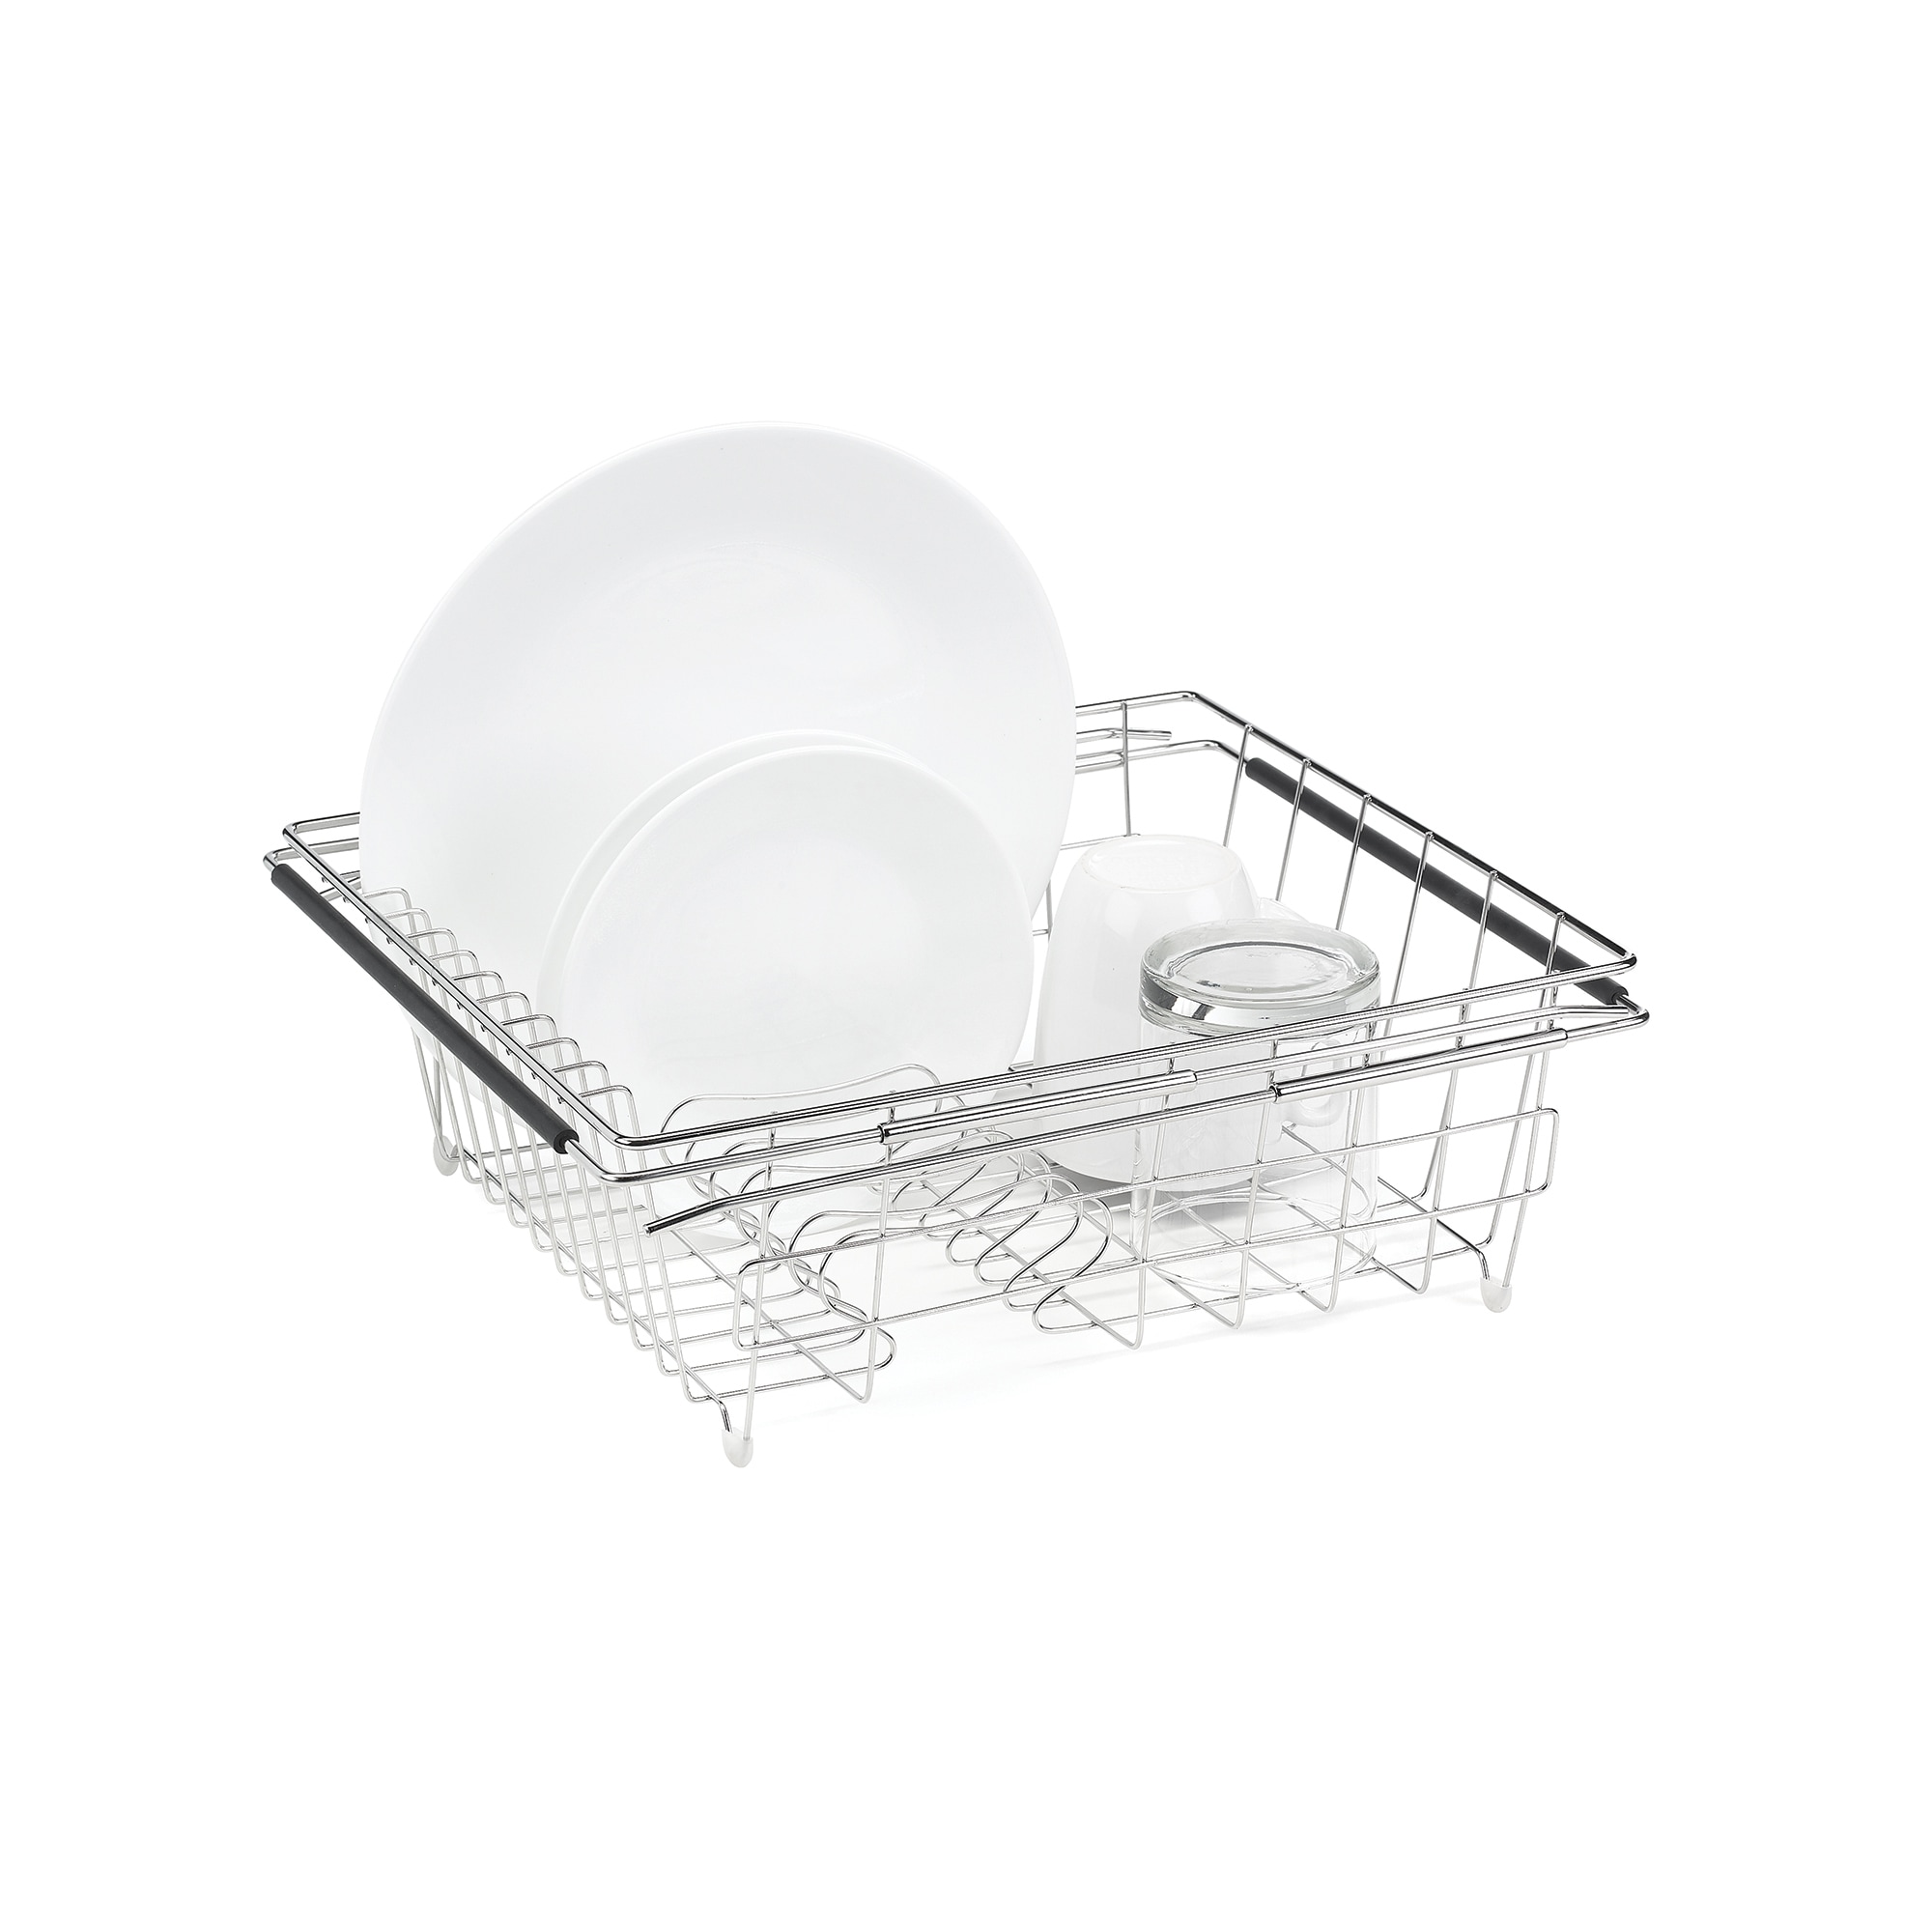 OXO Over-the-Sink Dish Rack